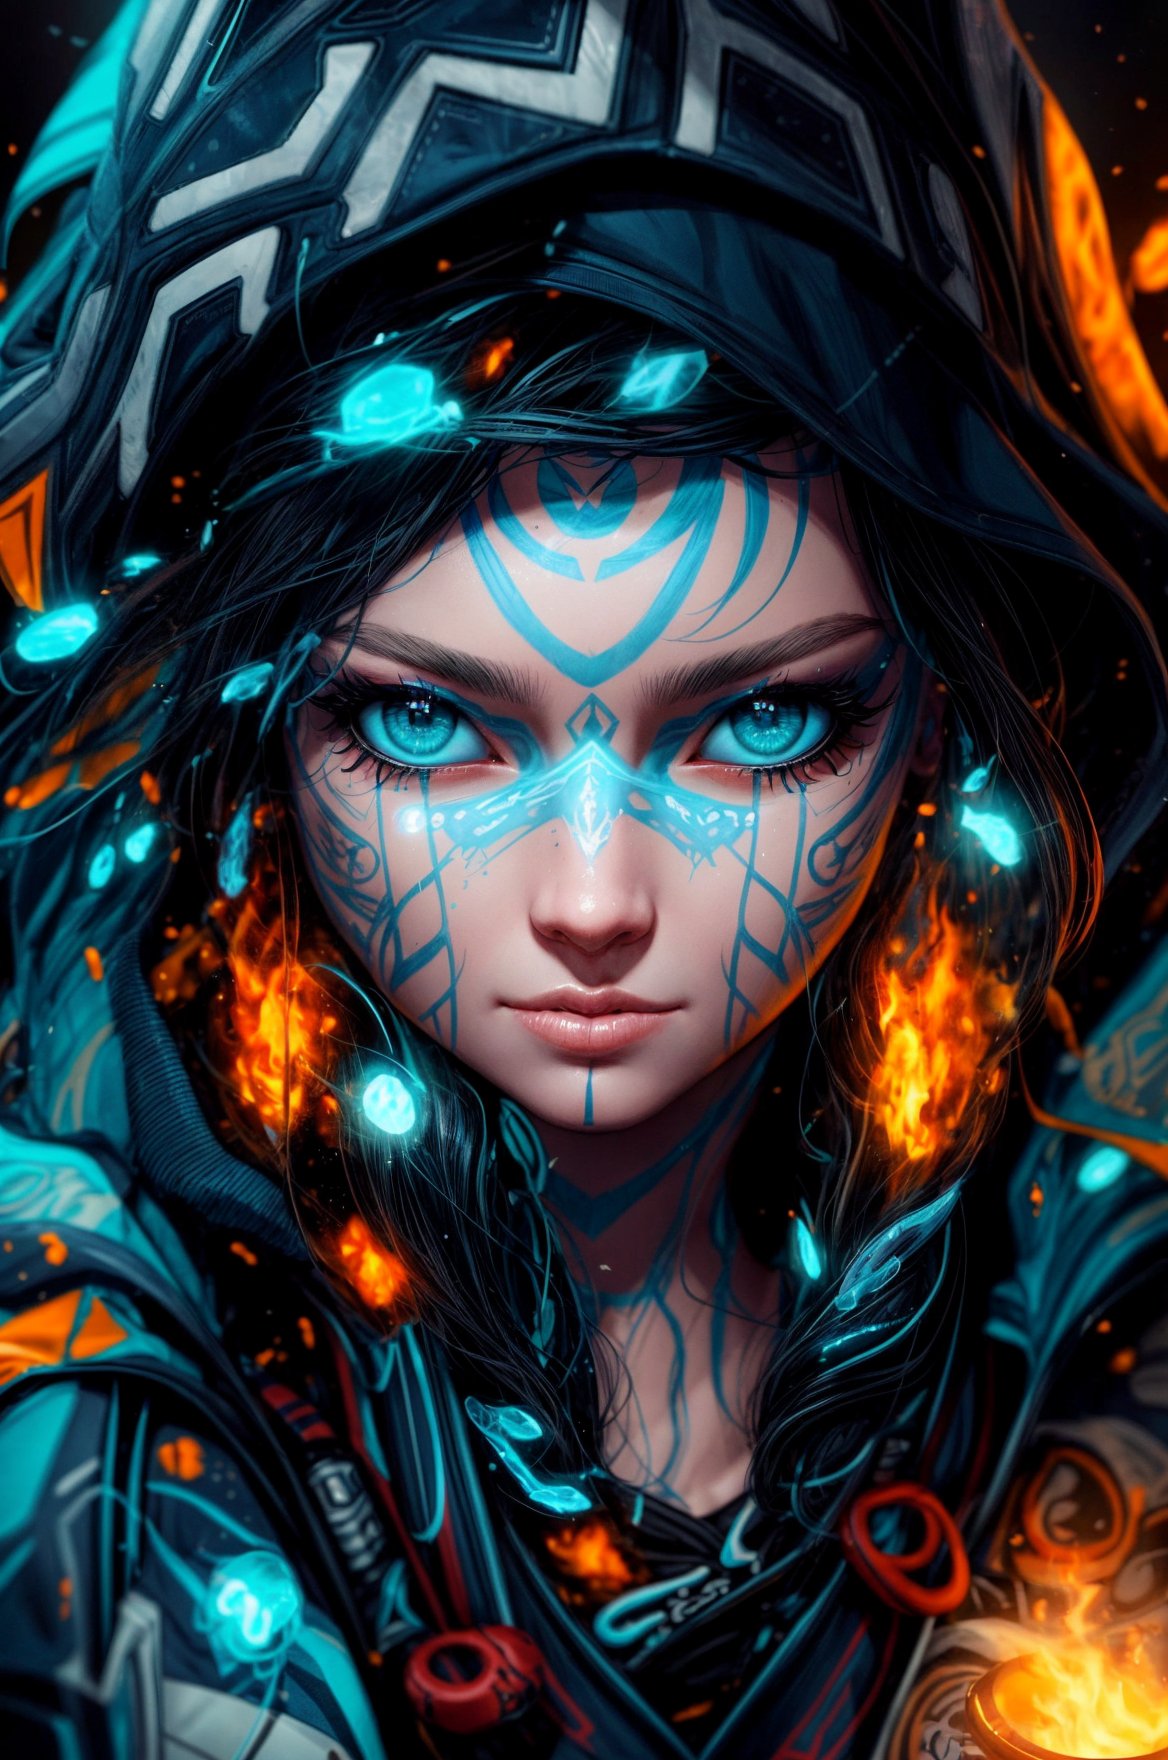 a close up of a person wearing a hoodie, inspired by rossdraws, Artstation contest winner, a young female shaman, unreal engine 5 4 k uhd image, andreas rocha style, fire eyes, intricate ornate anime cgi style, portrait of apex legends, warrior girl, detailed unblurred face, 8k render”, High Detailed